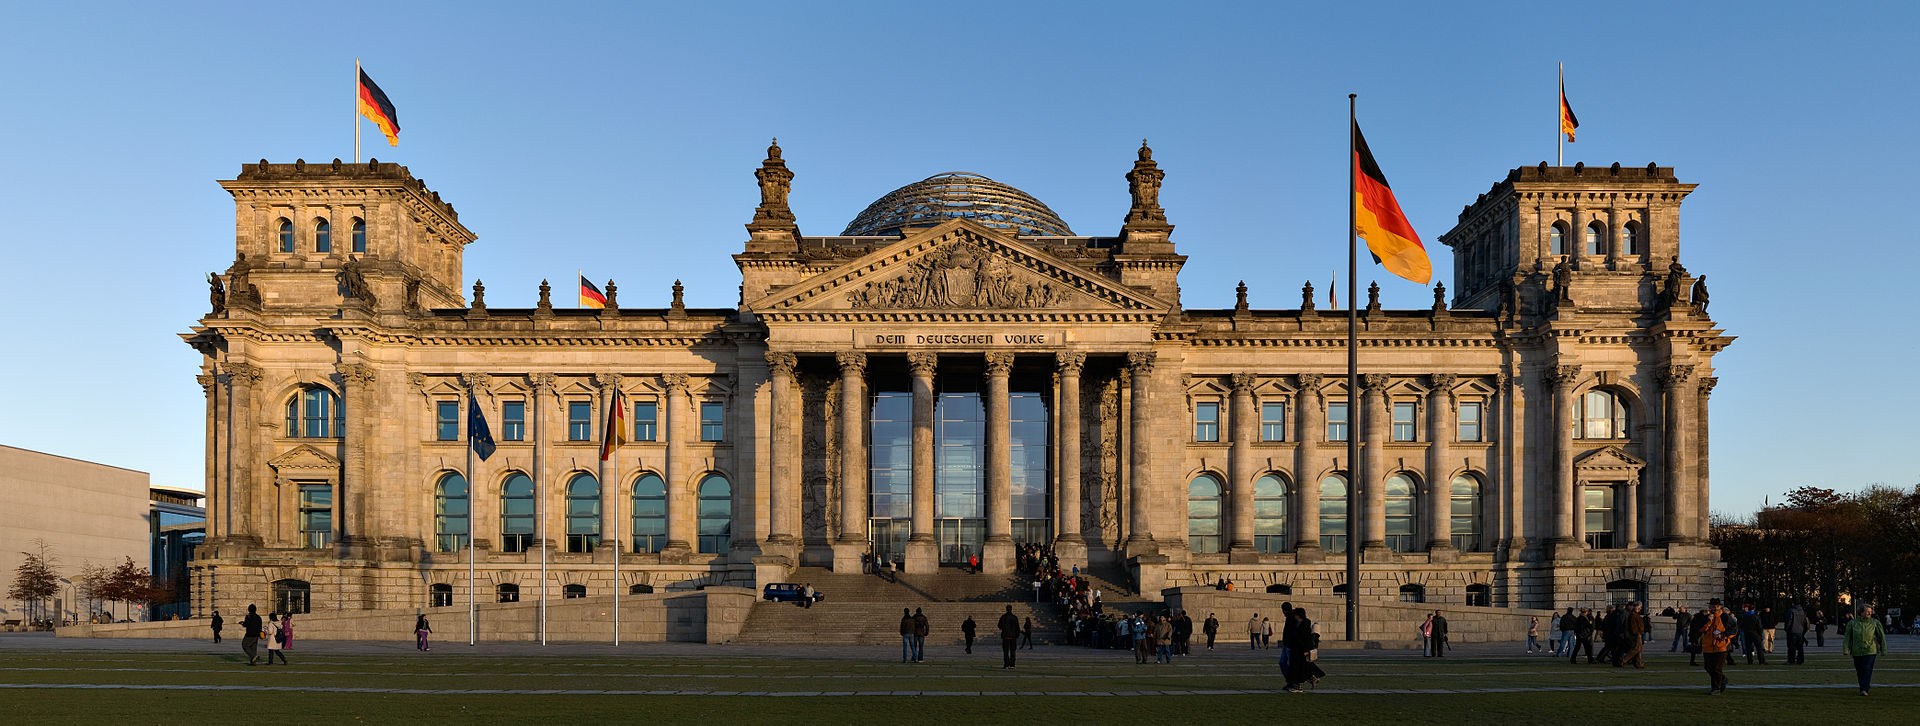 Reichstag building Berlin view from west before sunset